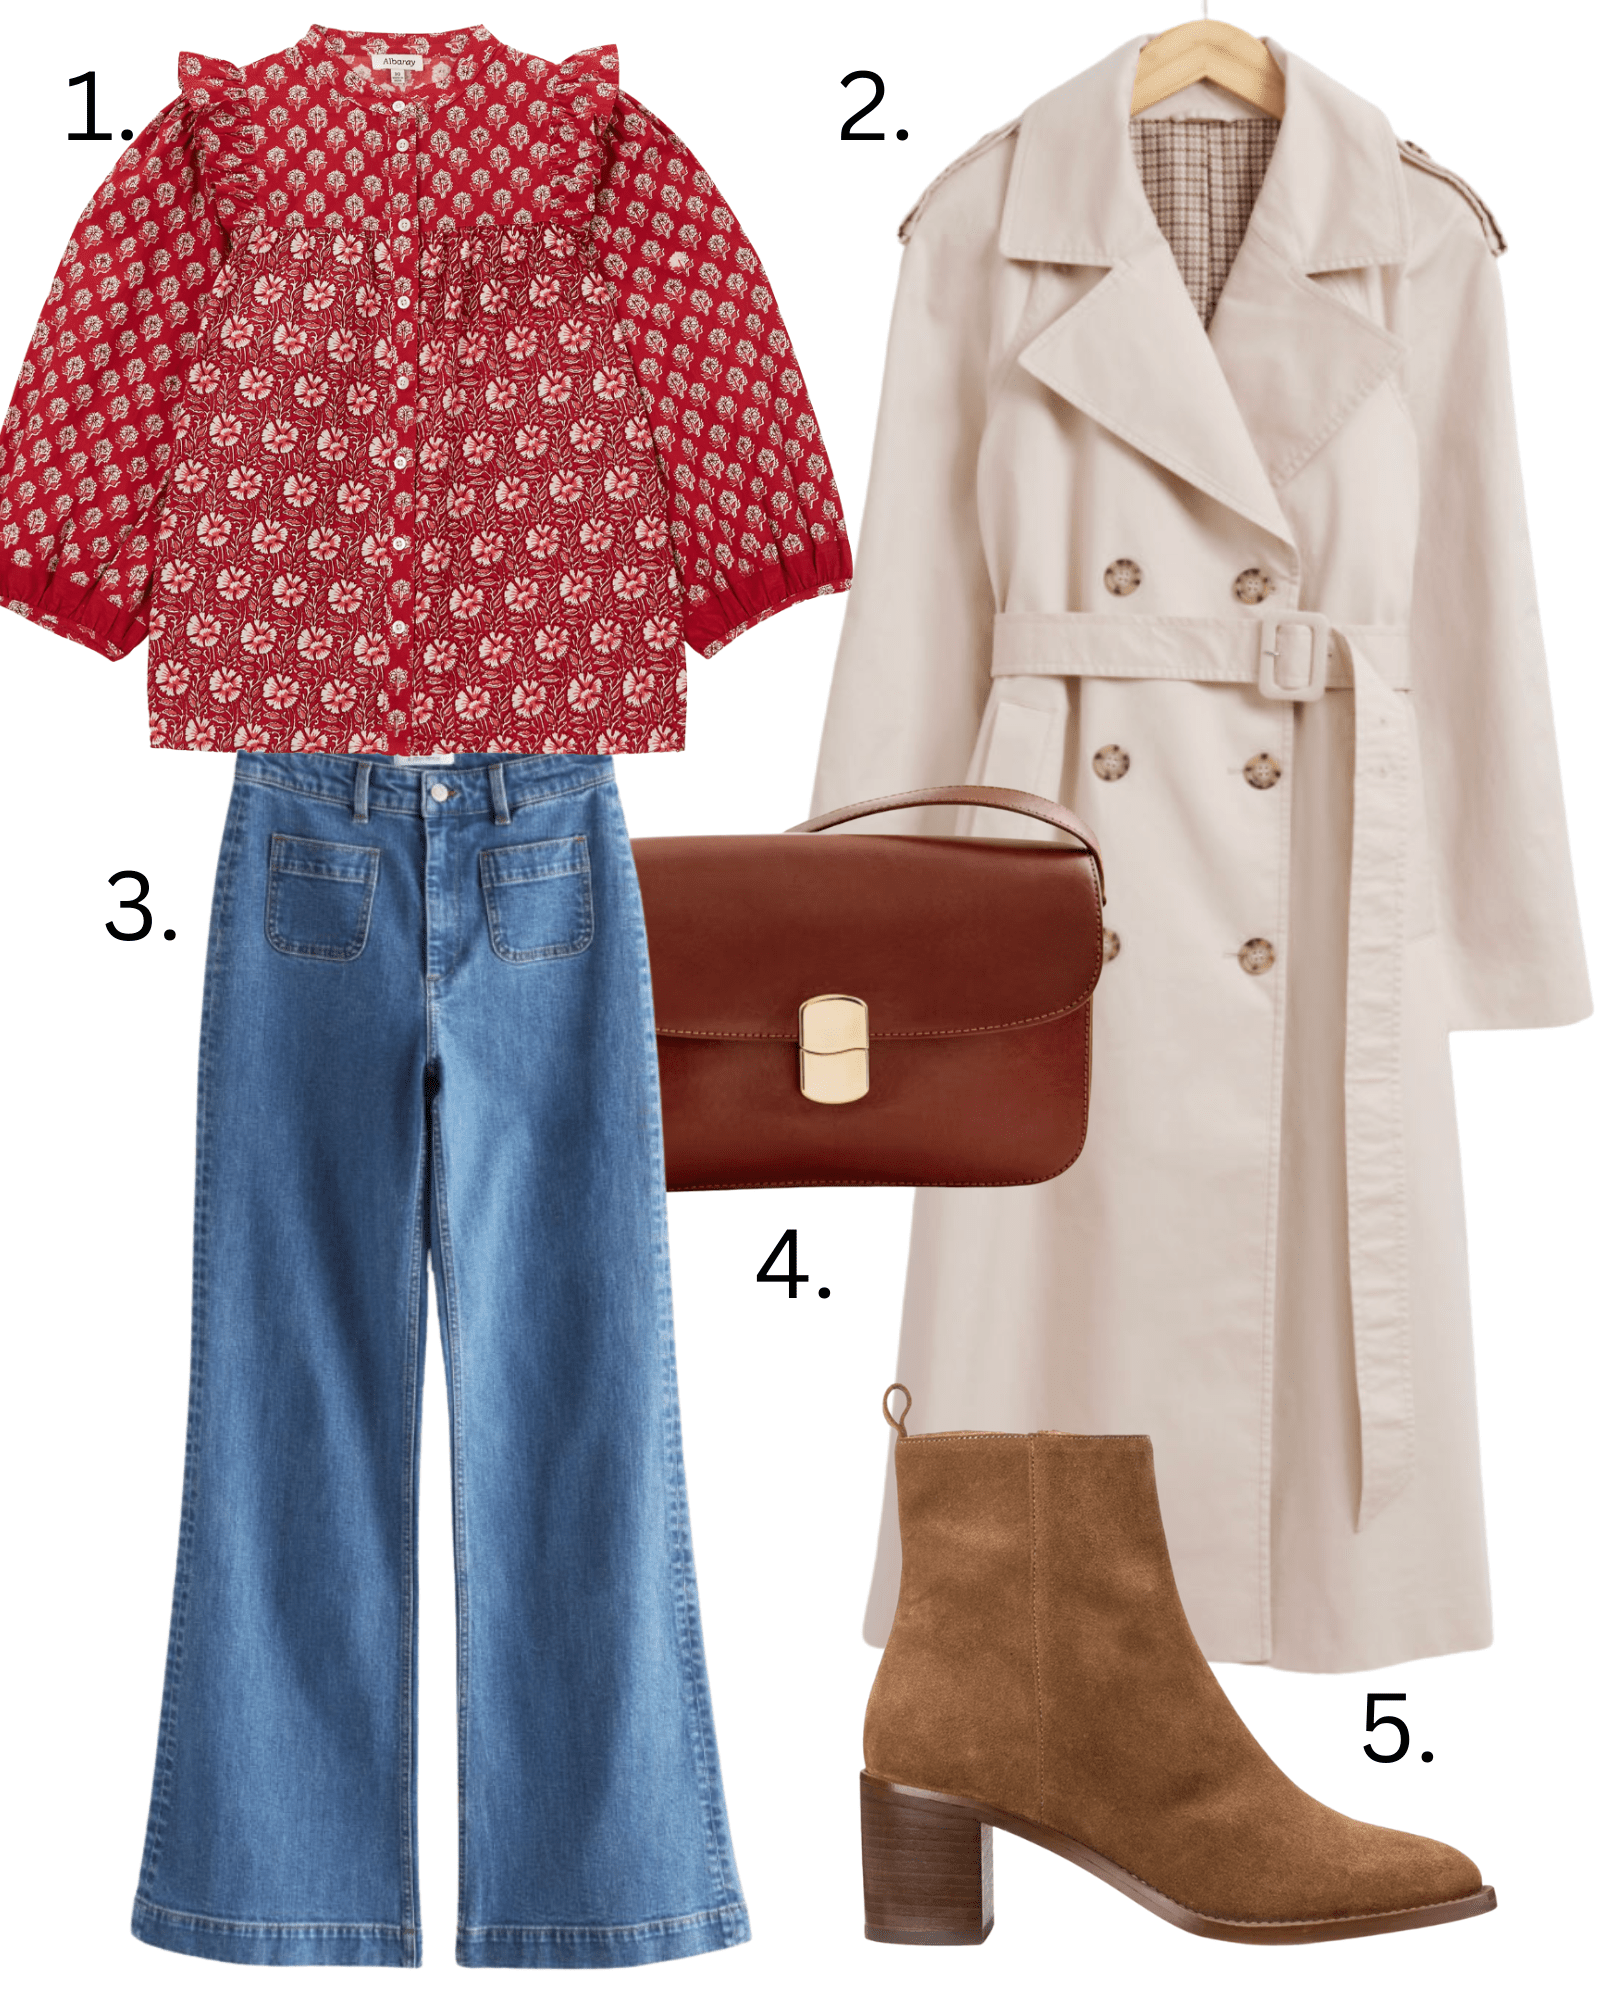 What to wear with your wide leg jeans (or flares)